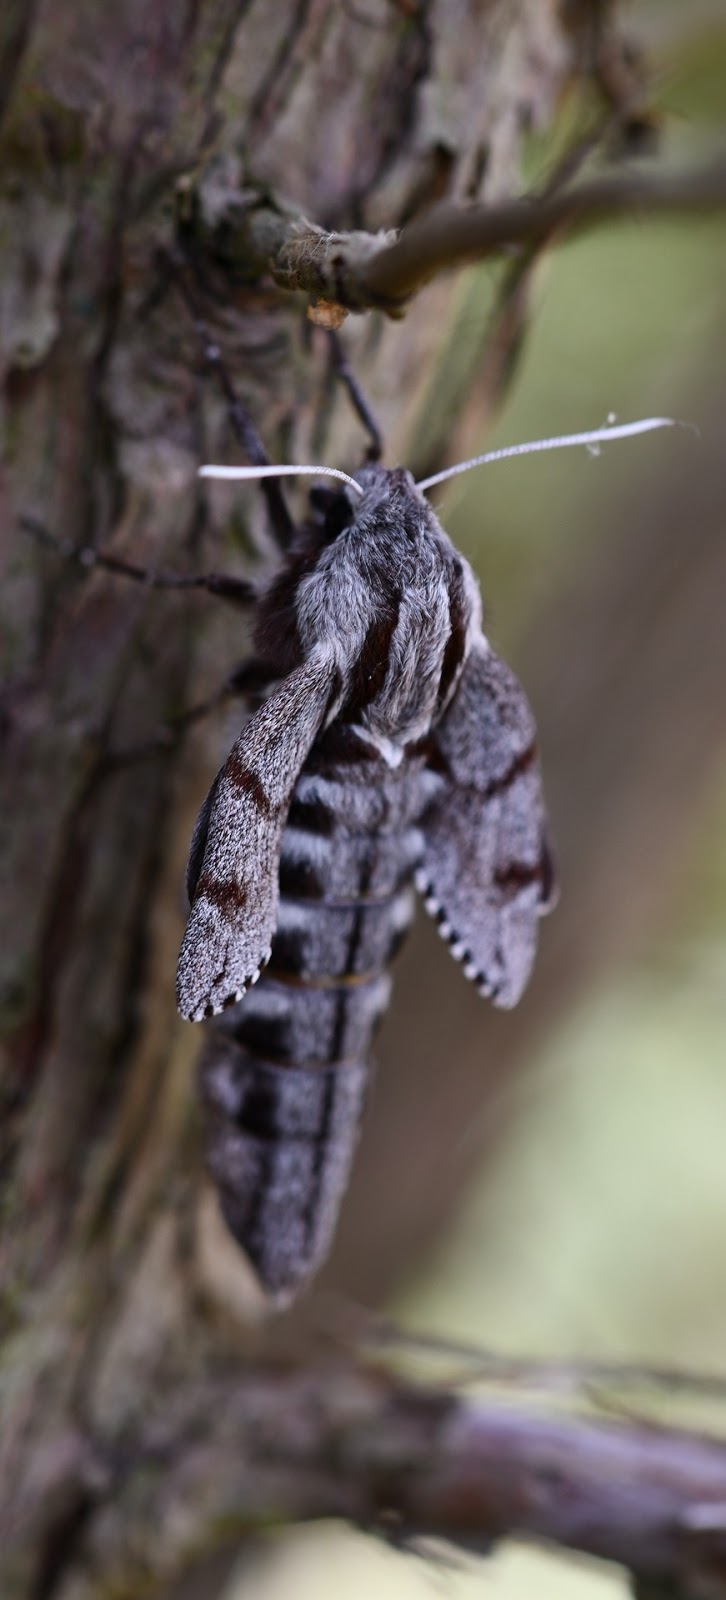 Picture of a moth up close.